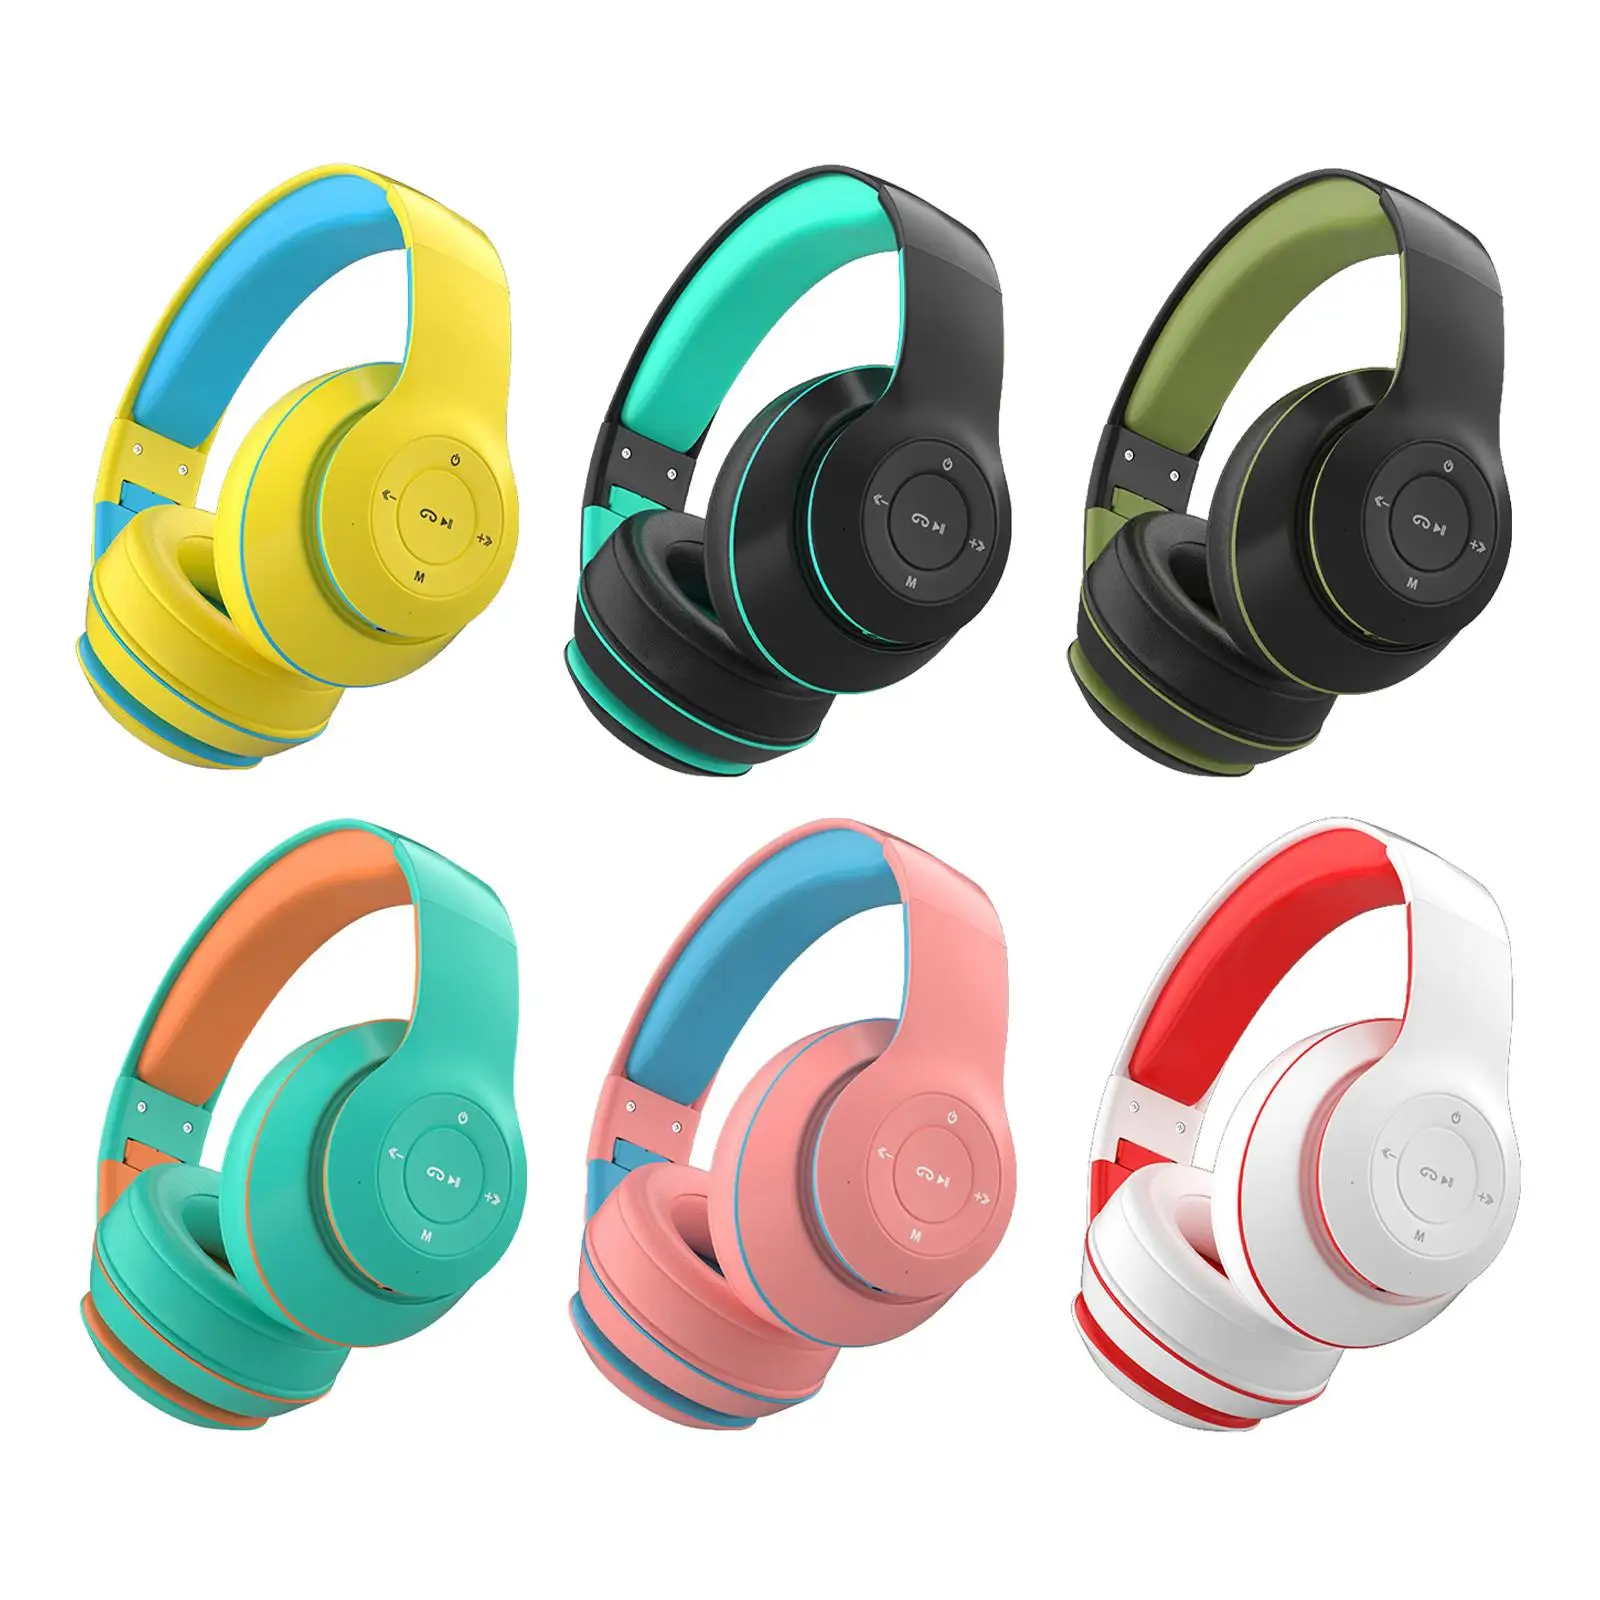 Wireless Headset Noise Canceling Built in Mic Bluetooth V5.1 Soft Protein Earmuffs Headphone for Cellphone PC Laptop Children